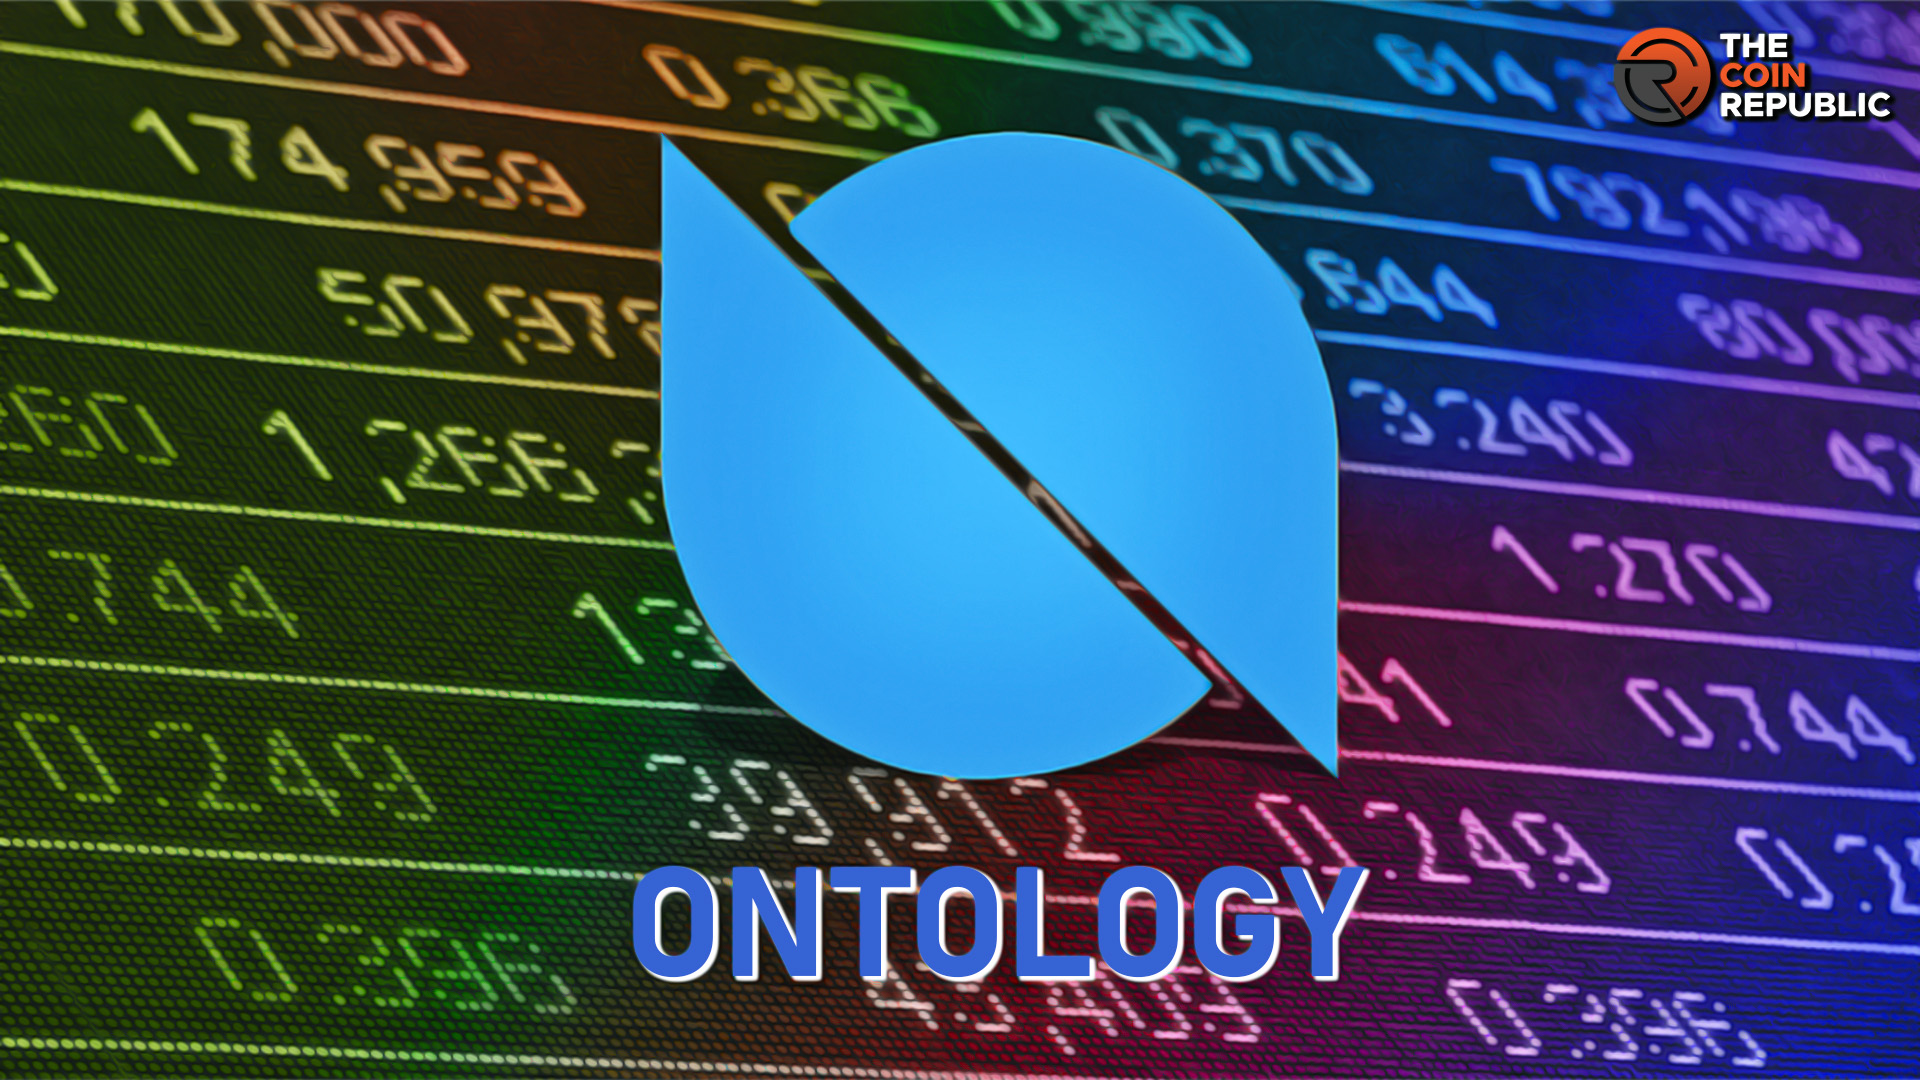 Ontology Price on the Rise: What’s Behind the ONT Crypto Surge?